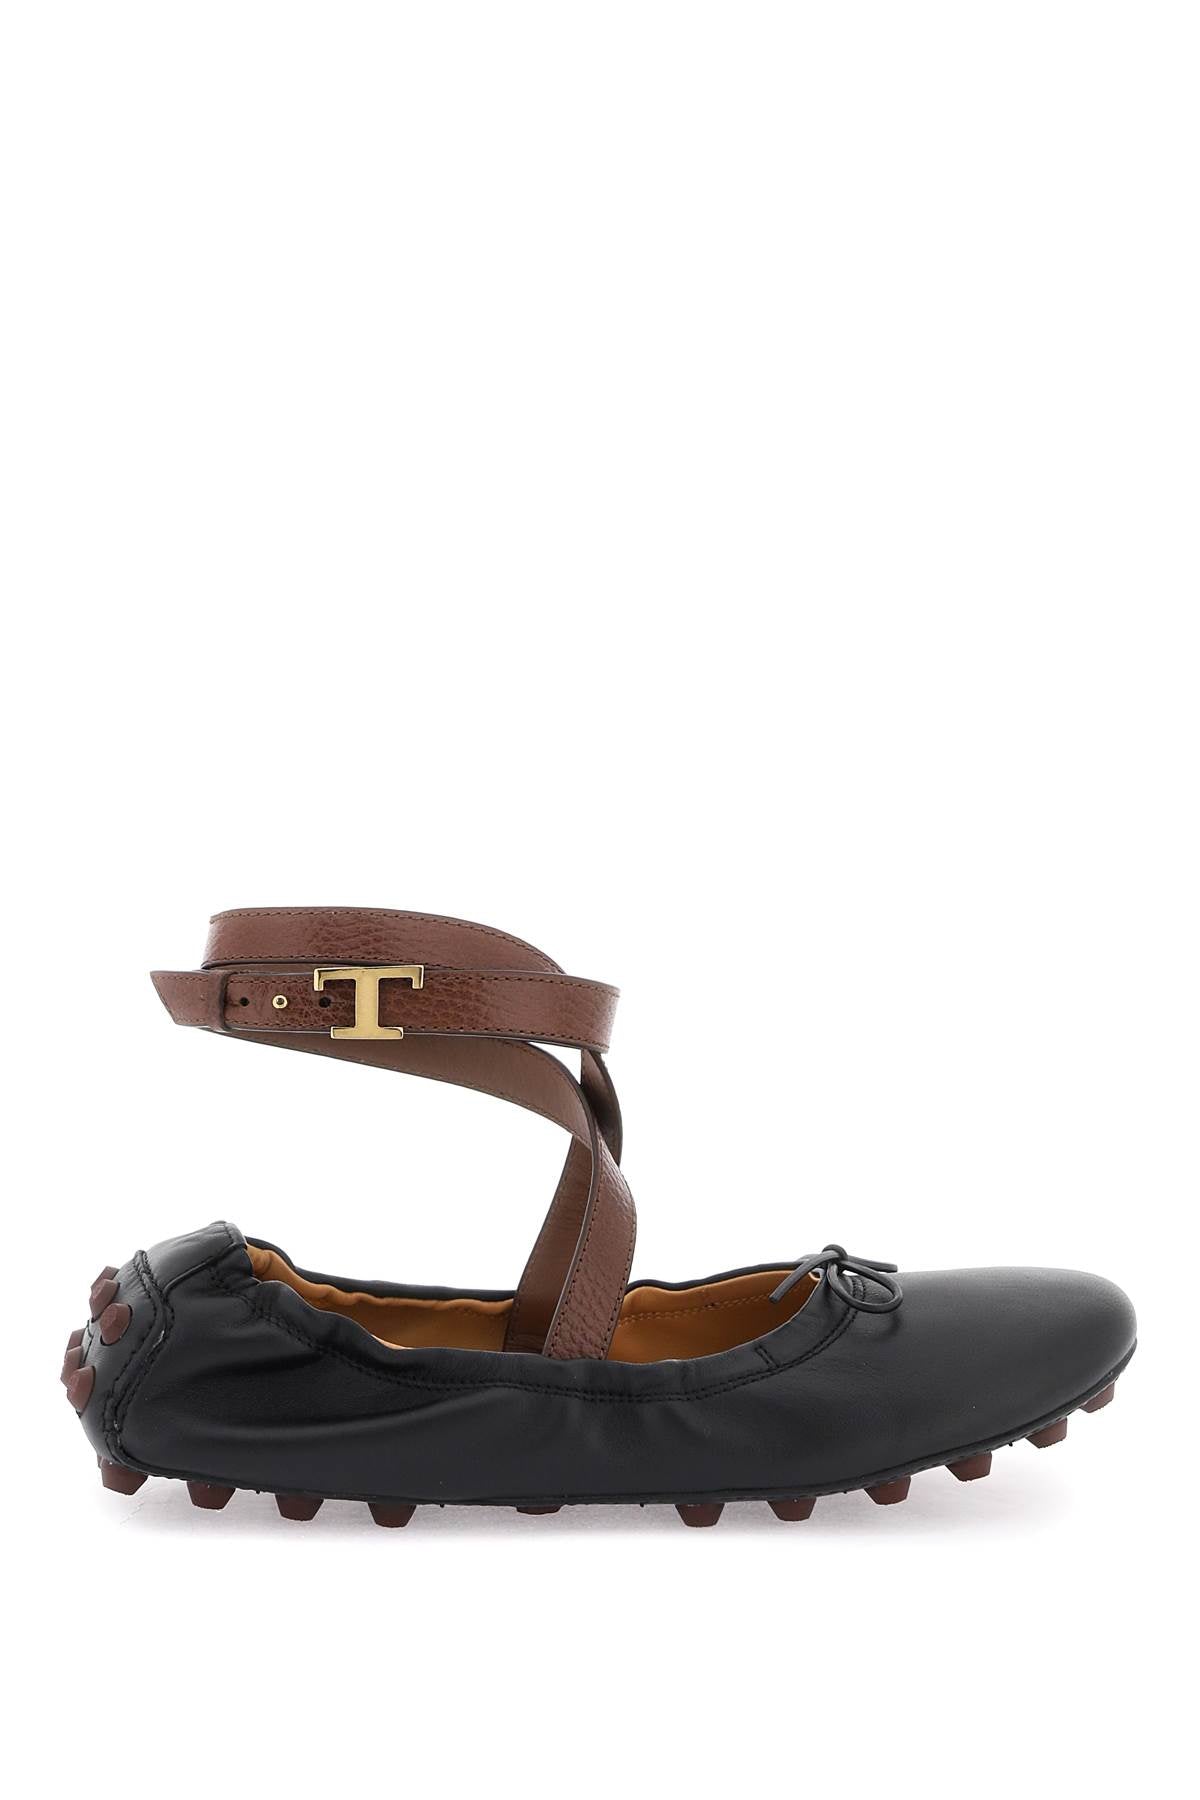 Tod's bubble leather ballet flats shoes with strap-0